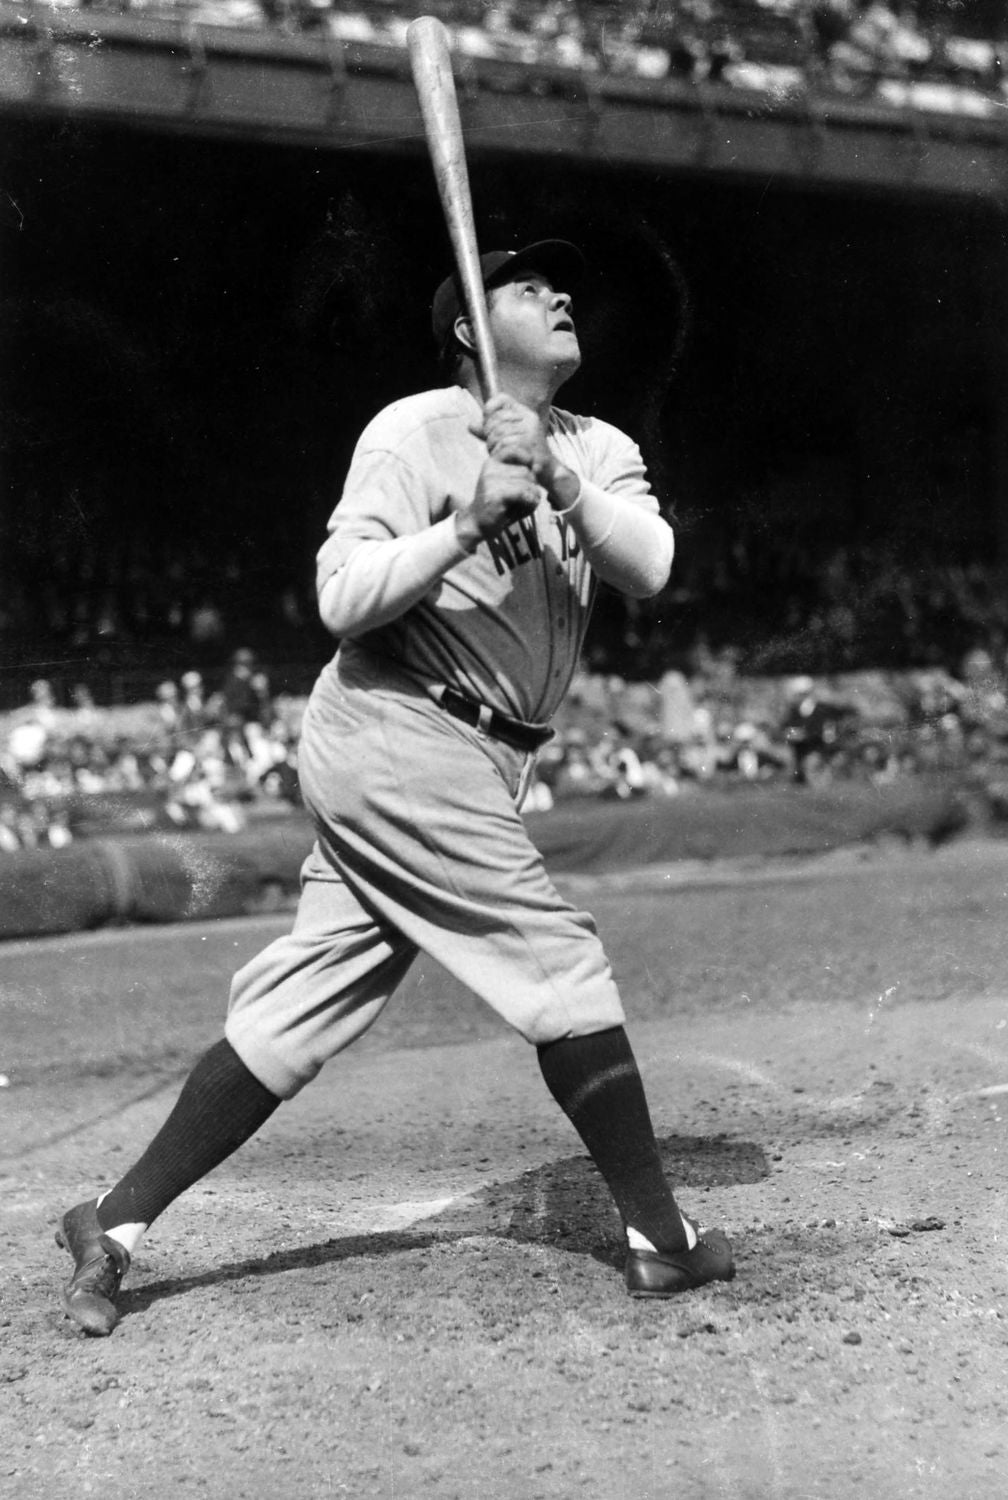 babe ruth uniform number